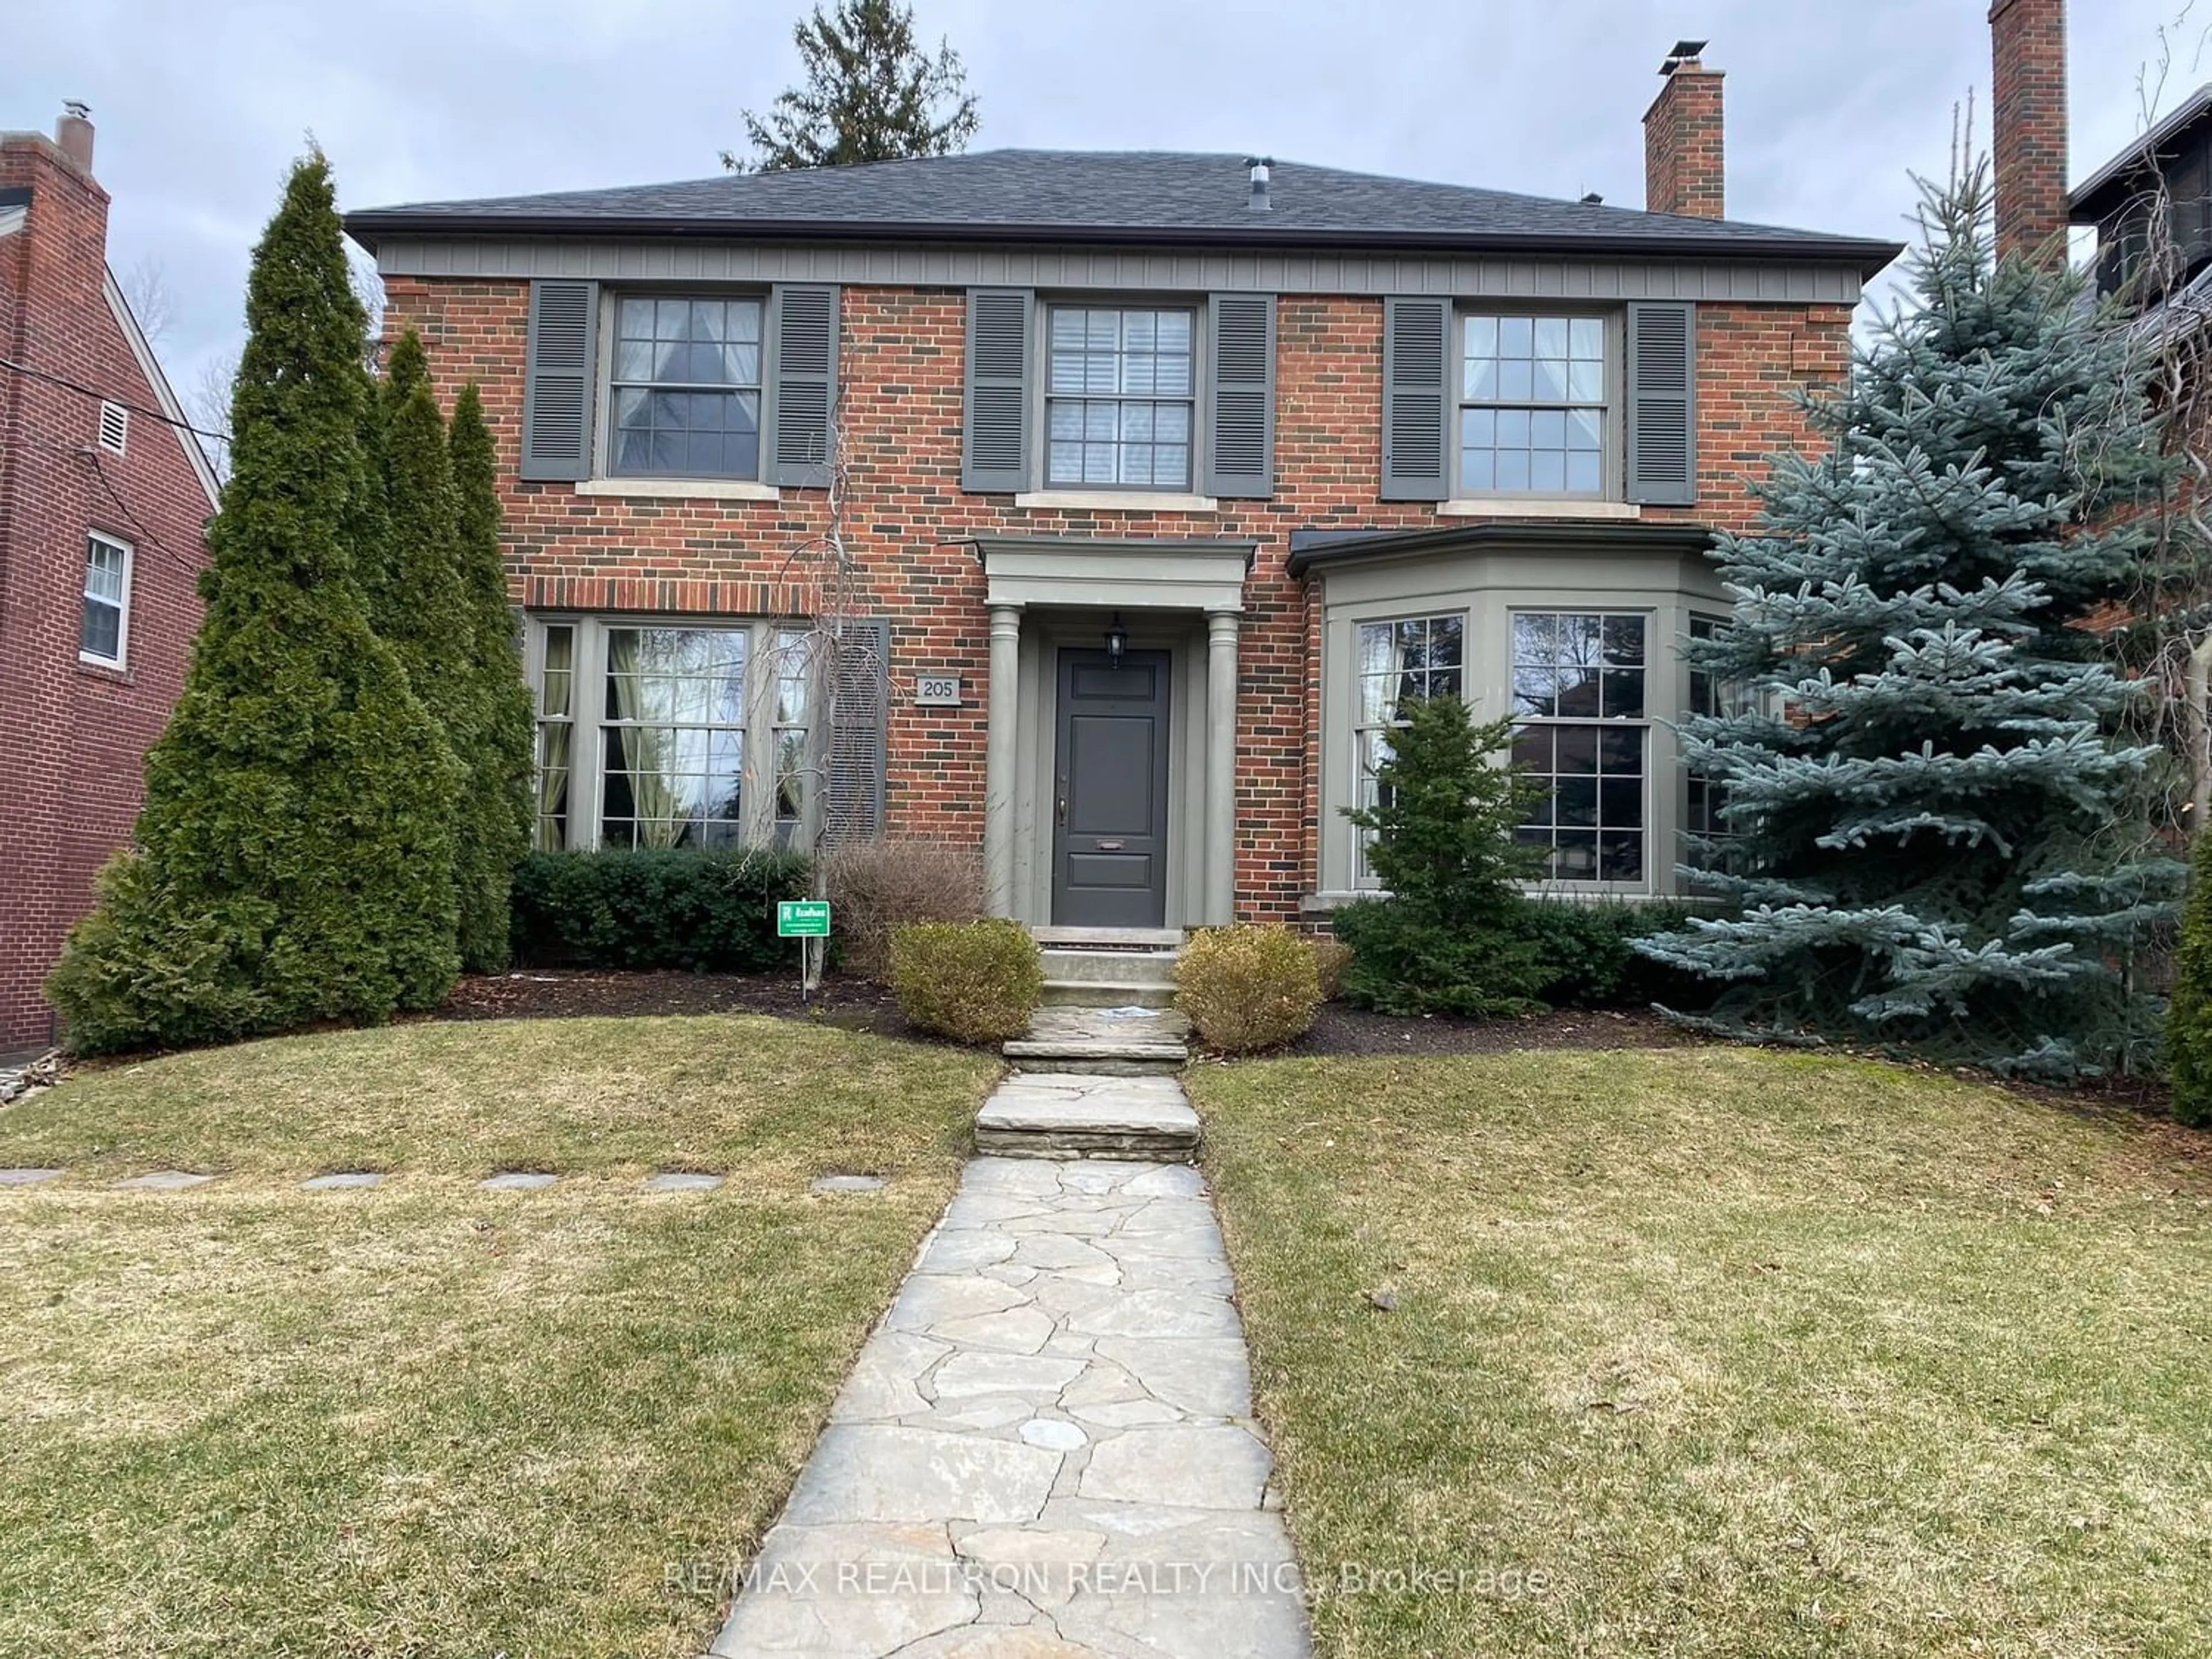 Home with brick exterior material for 205 Cortleigh Blvd, Toronto Ontario M5N 1P6